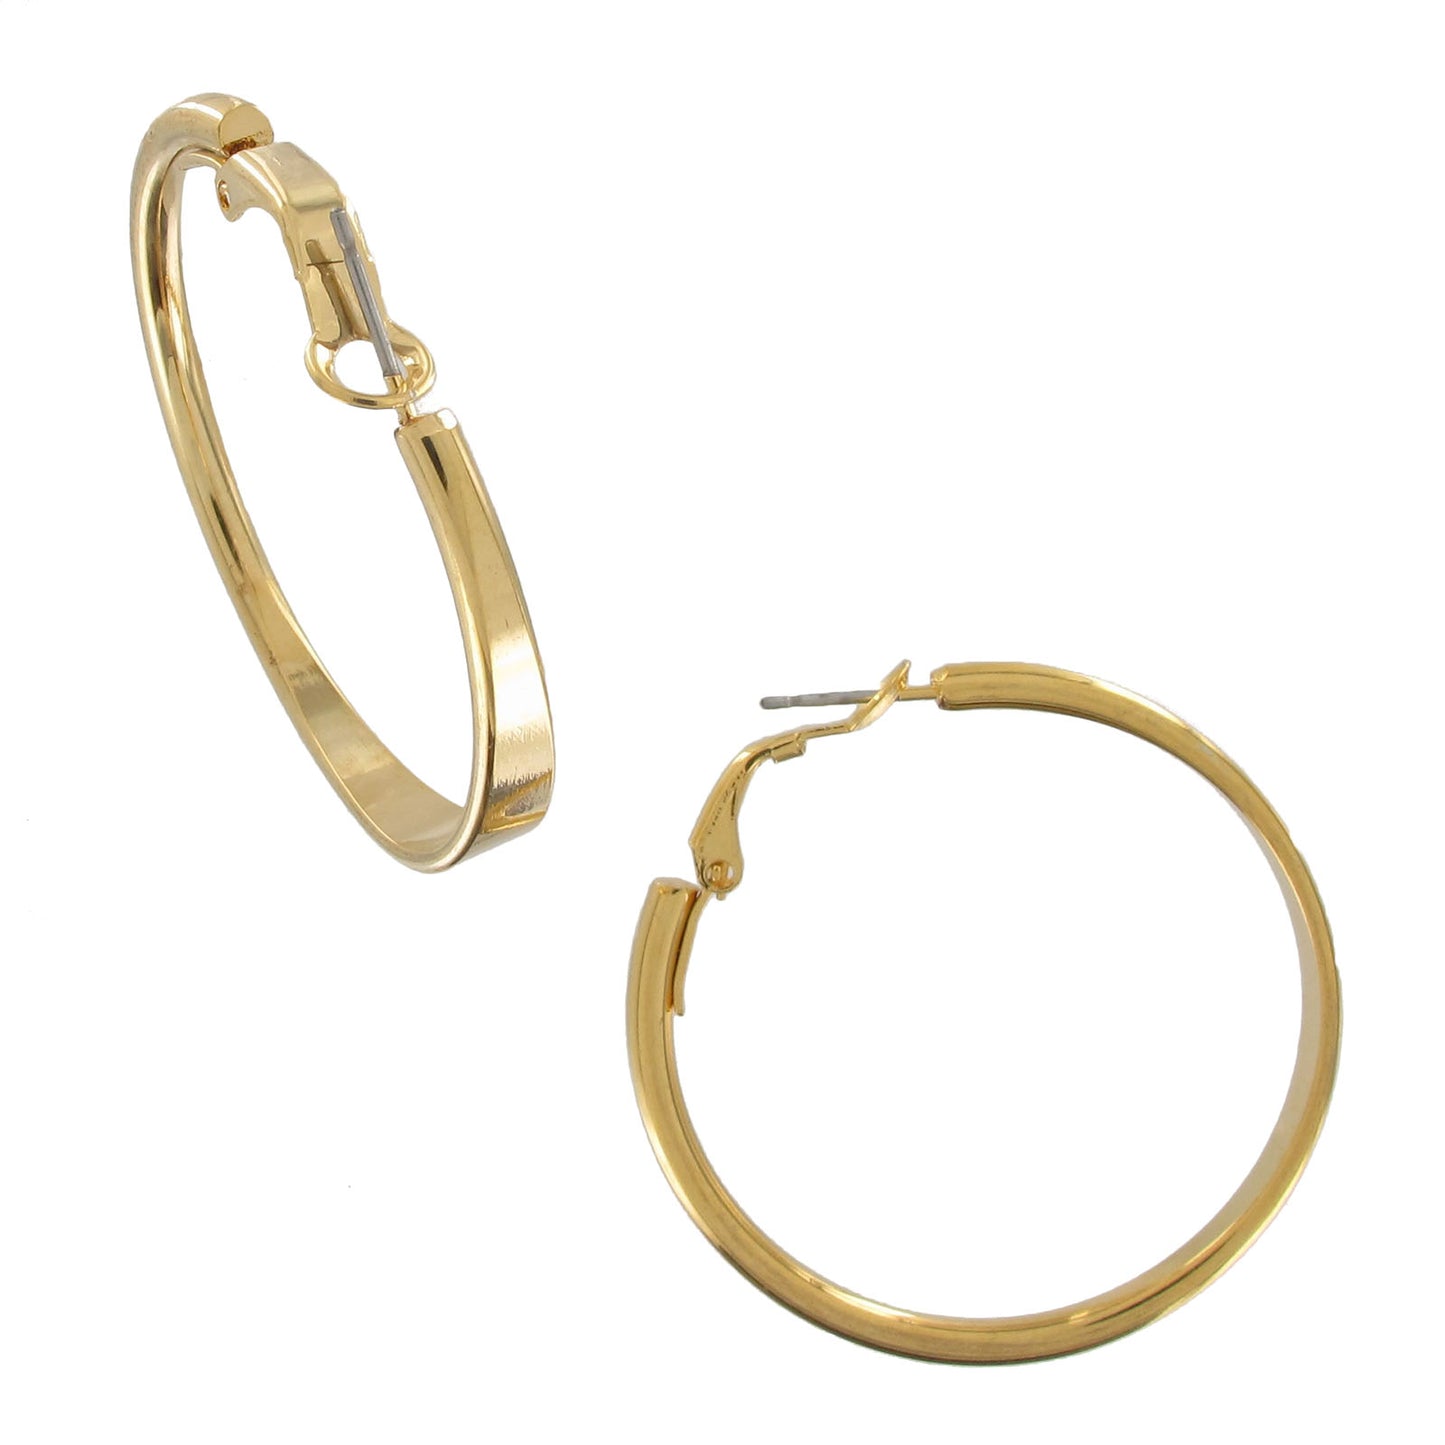 Shiny Gold Tone Classic Round Hoop Earrings Pierced  1 3/8" Surgical Steel Post